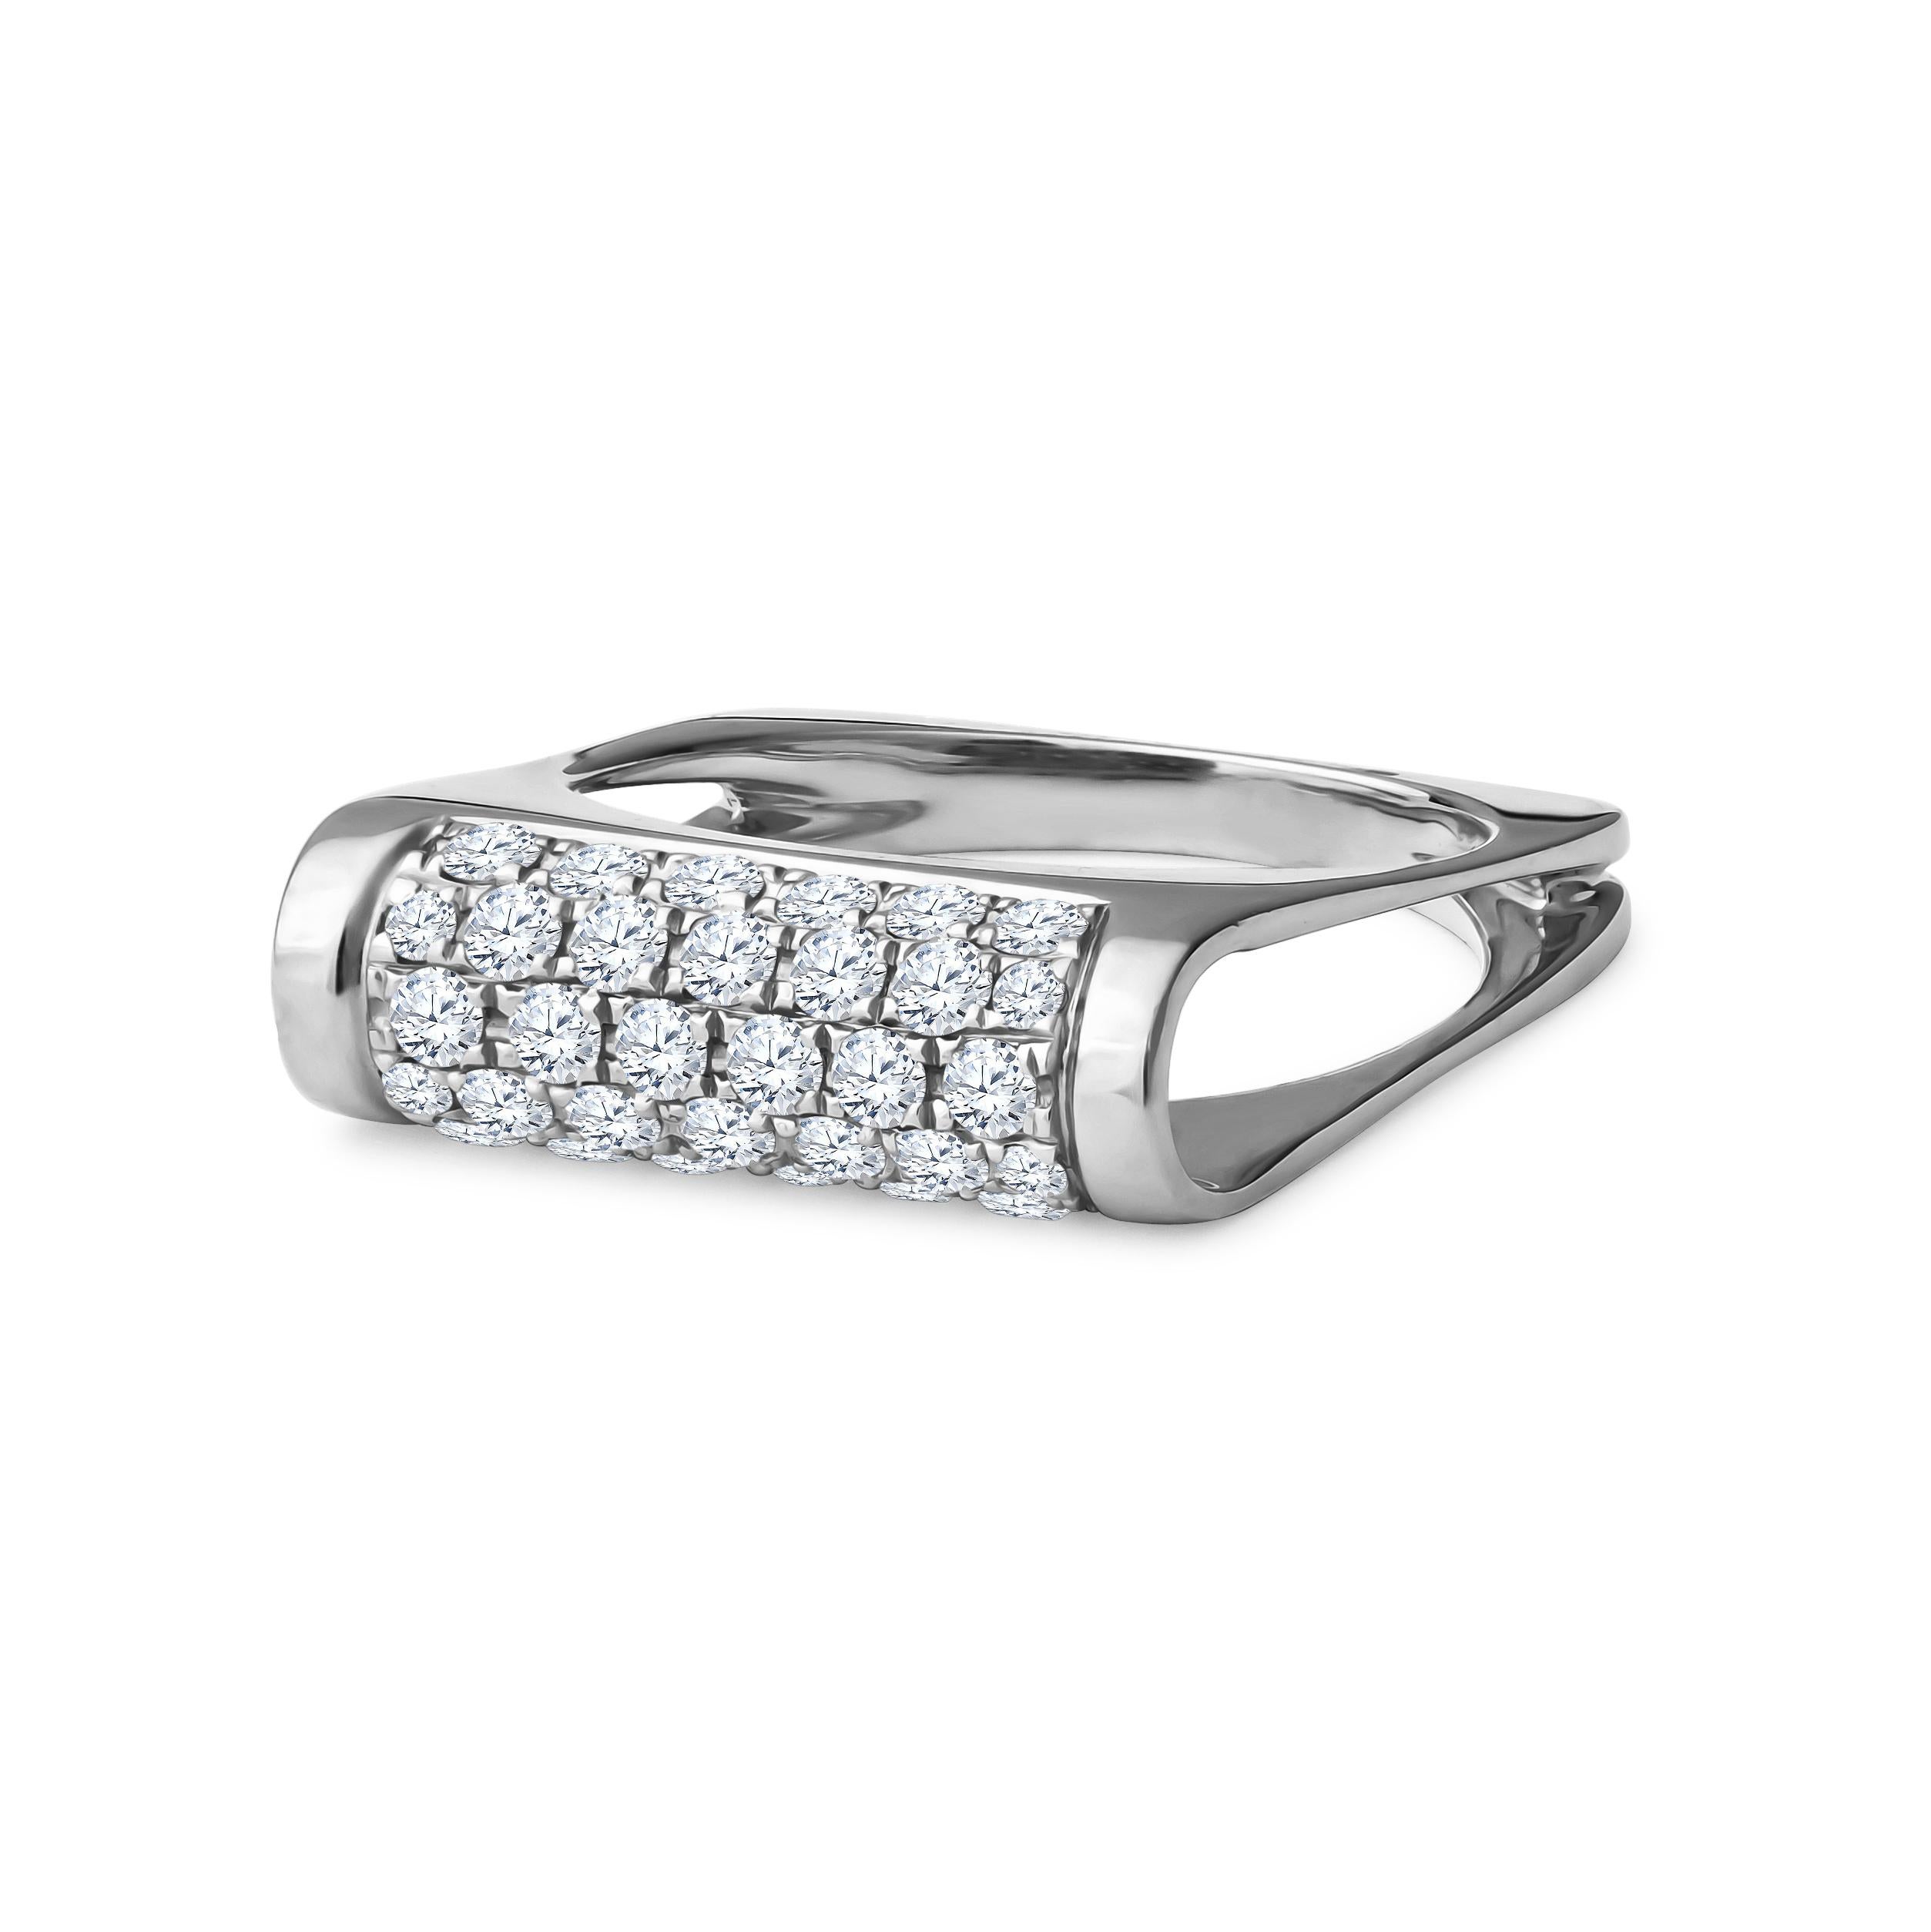 This incredibly unique ring is open-sided and features a squared shank. It has 0.63ctw in pave round diamonds, set in 18kt white gold. The ring is a size 6.25, but it can be resized upon request. 